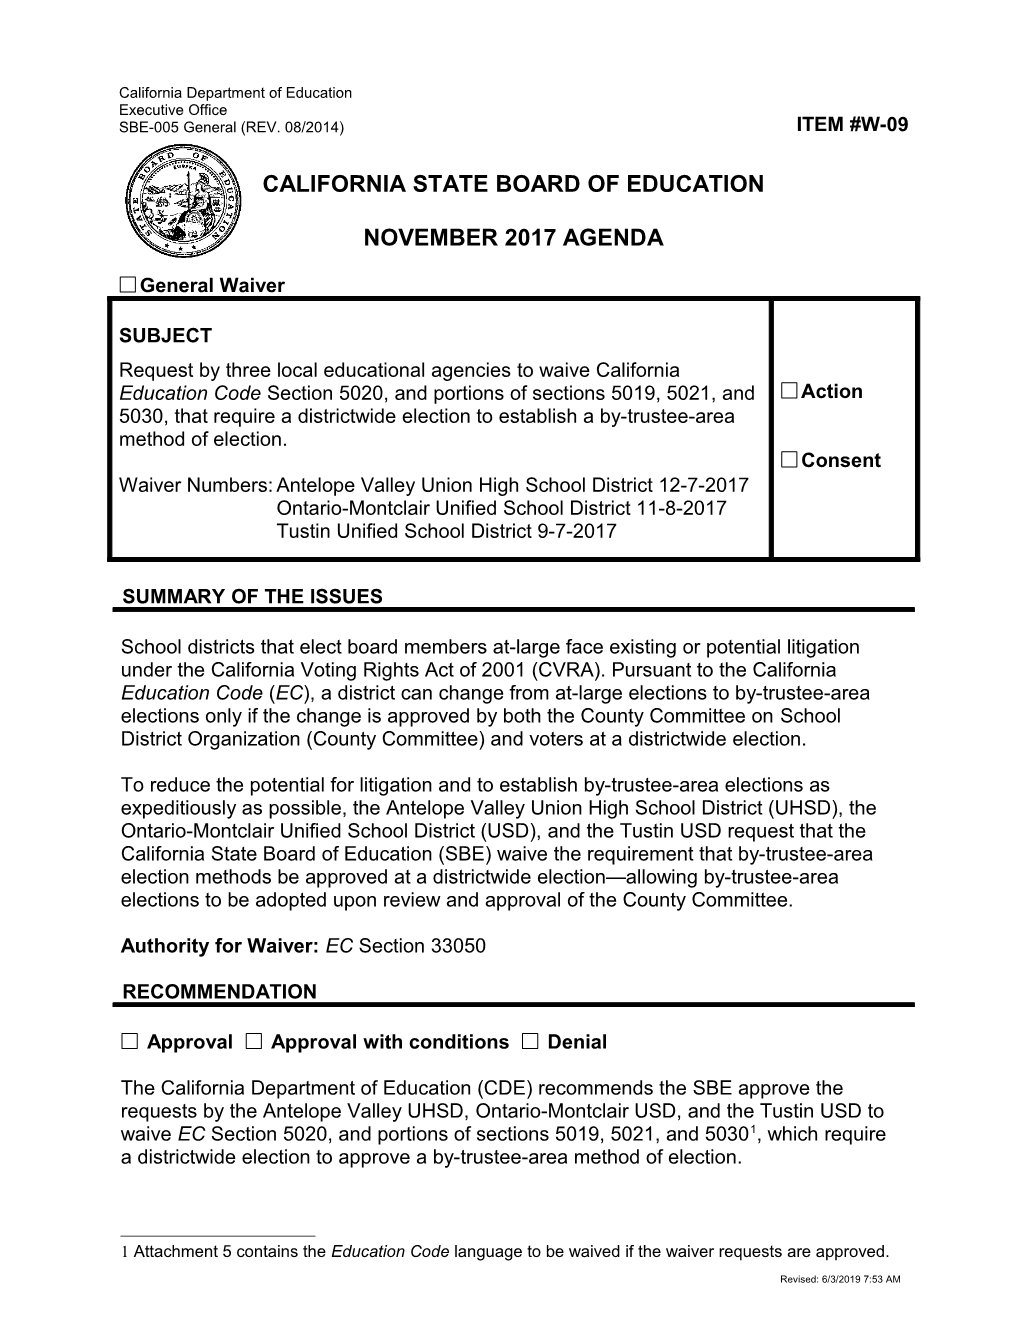 November 2017 Waiver Item W-09 - Meeting Agendas (CA State Board of Education)